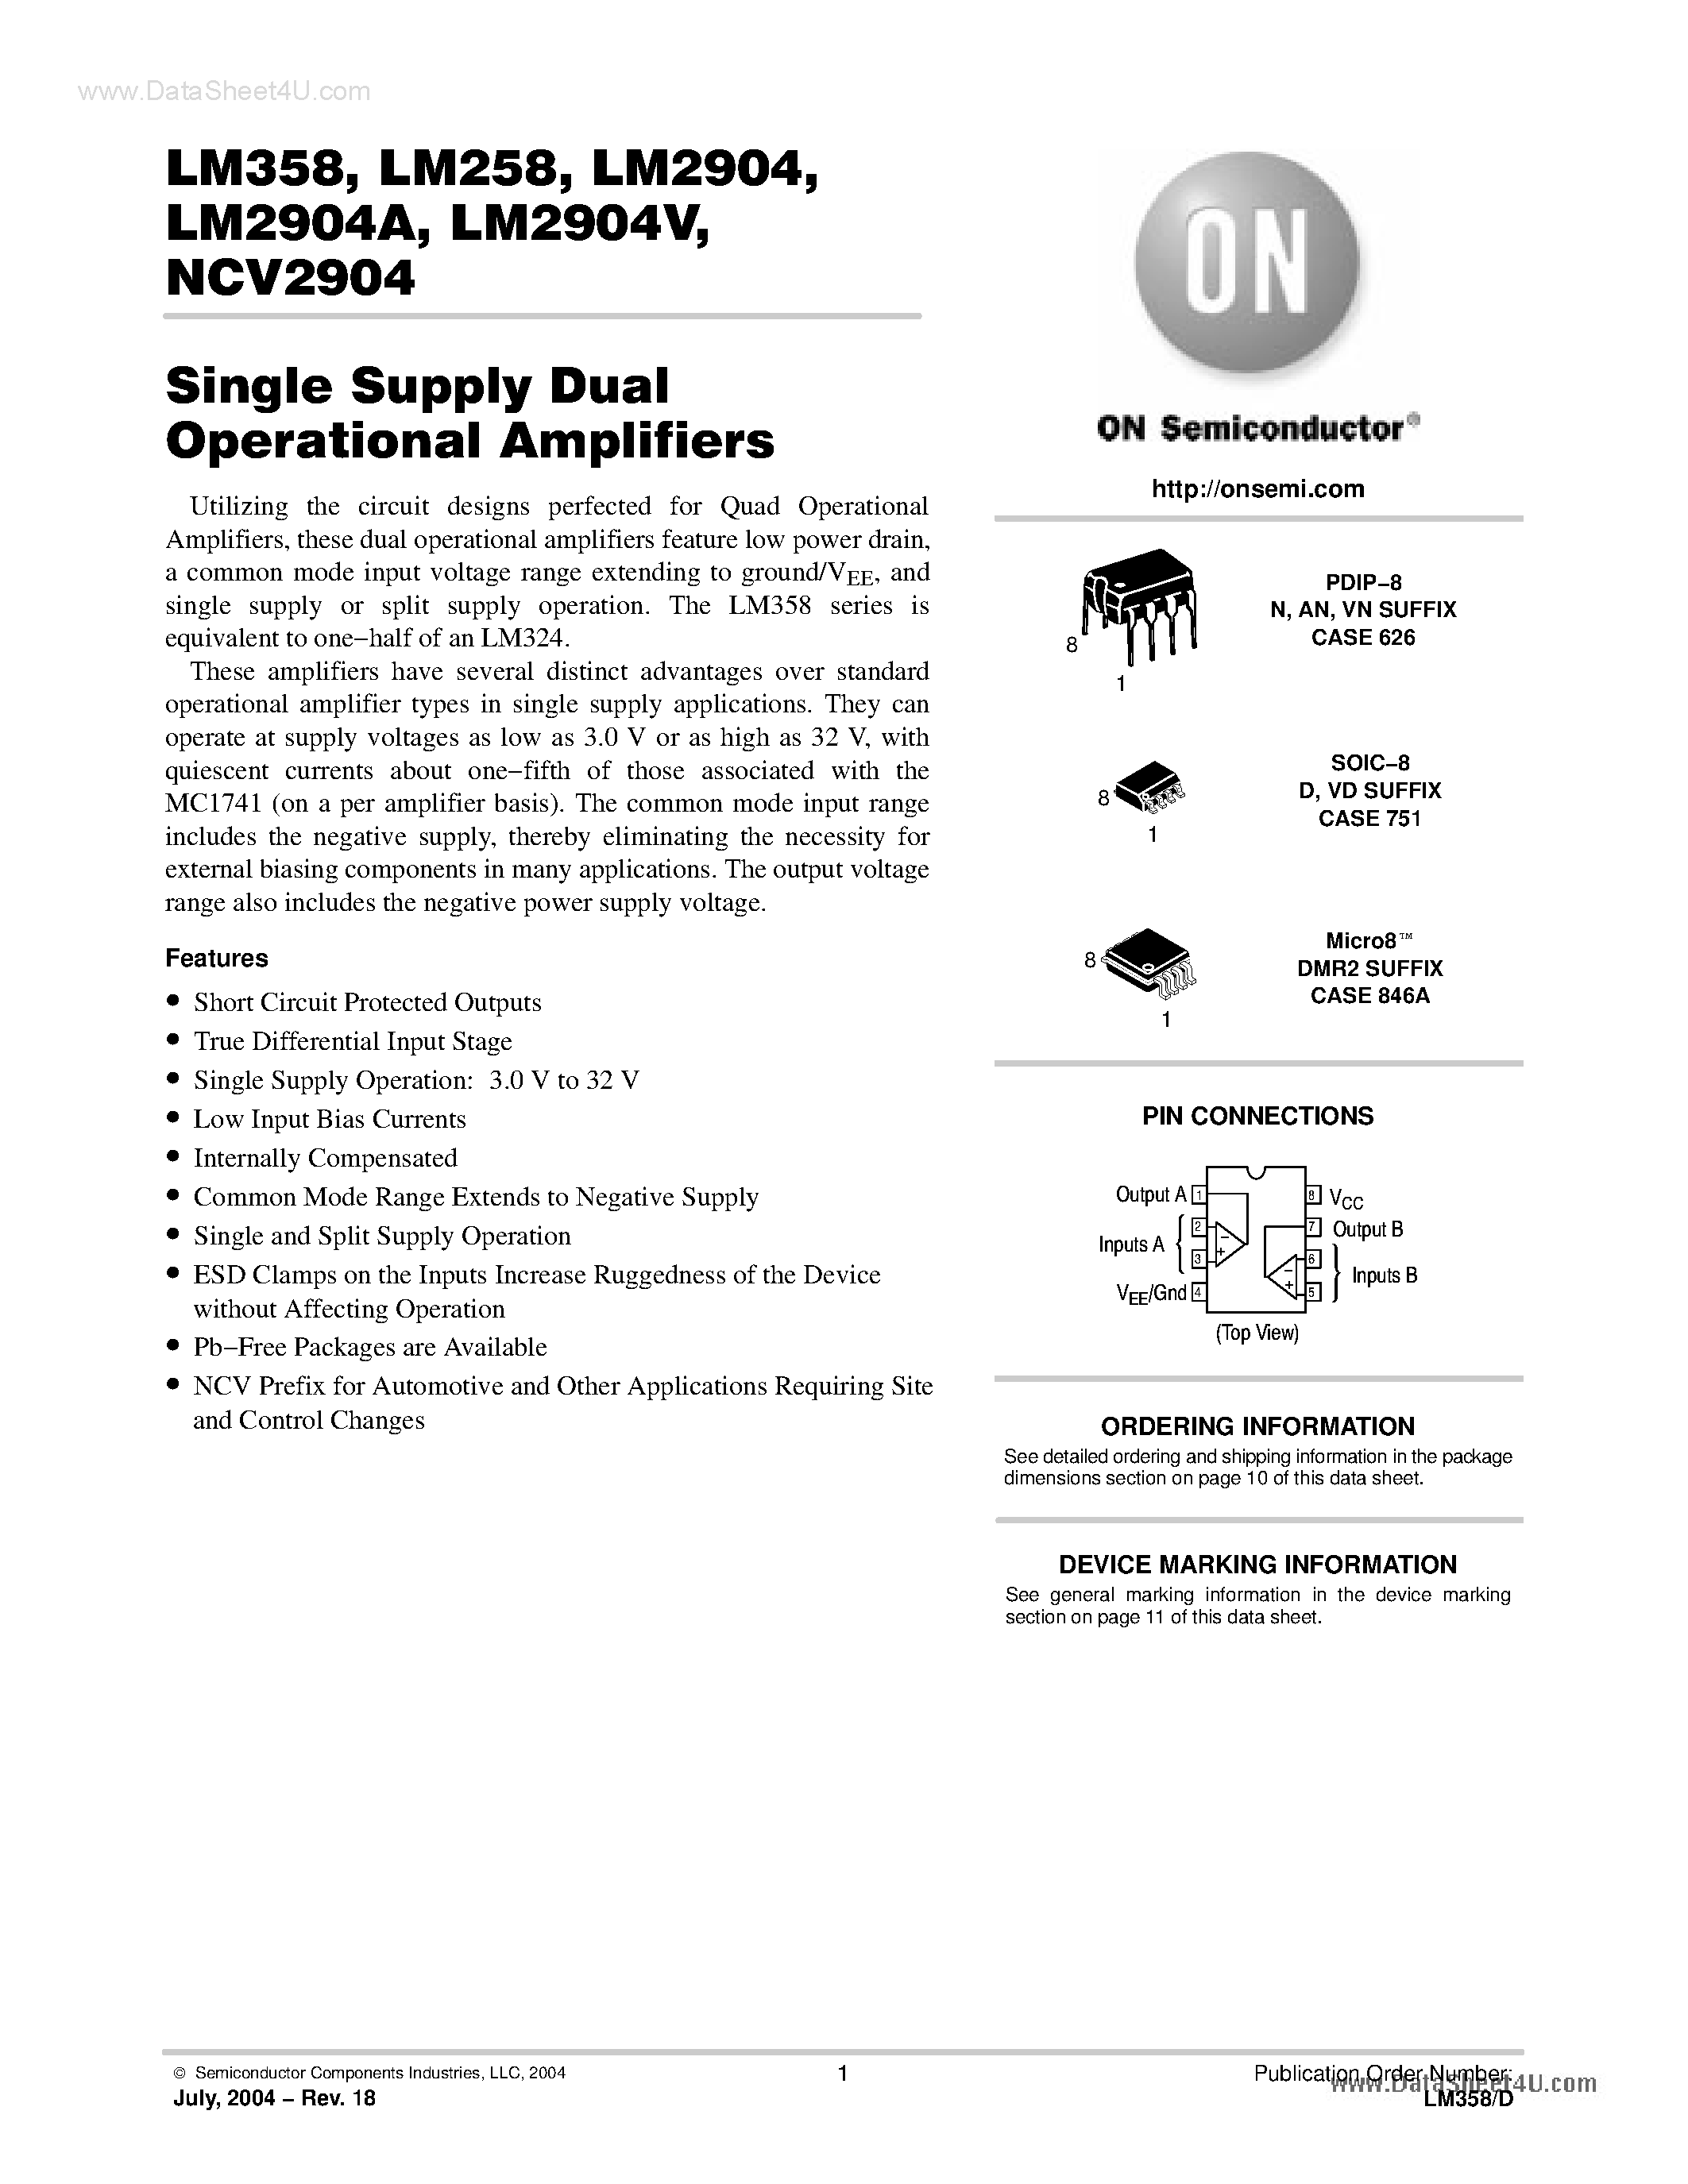 Datasheet LM258 - Single Supply Dual Operational Amplifiers page 1